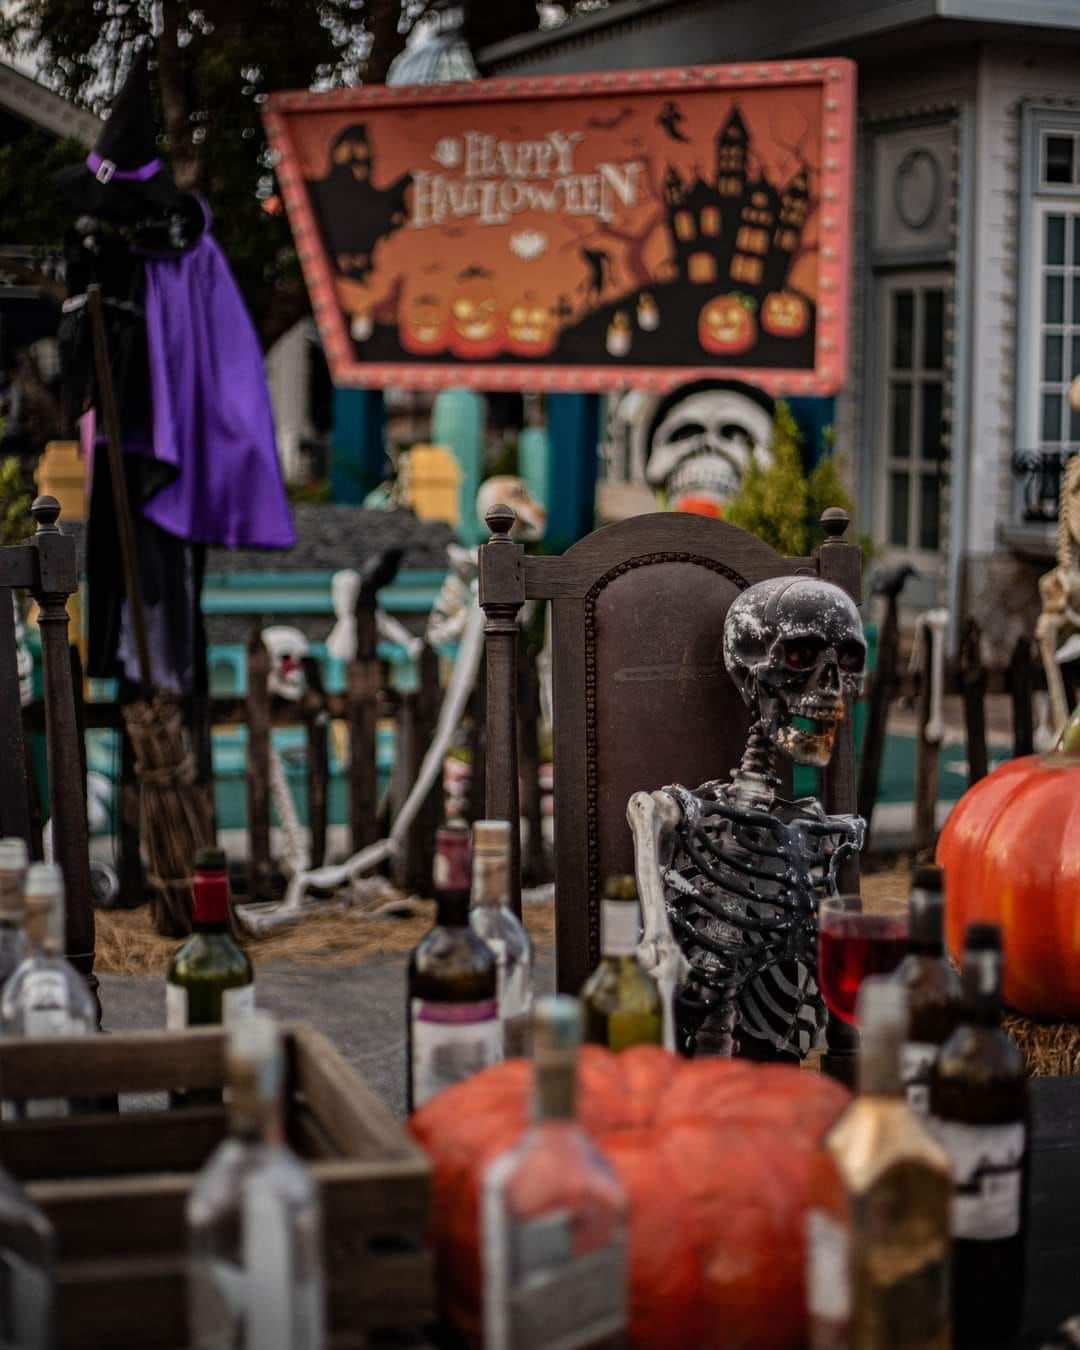 Chocolate Ville decorated with Halloween-themed props including carved pumpkins and skeletons.